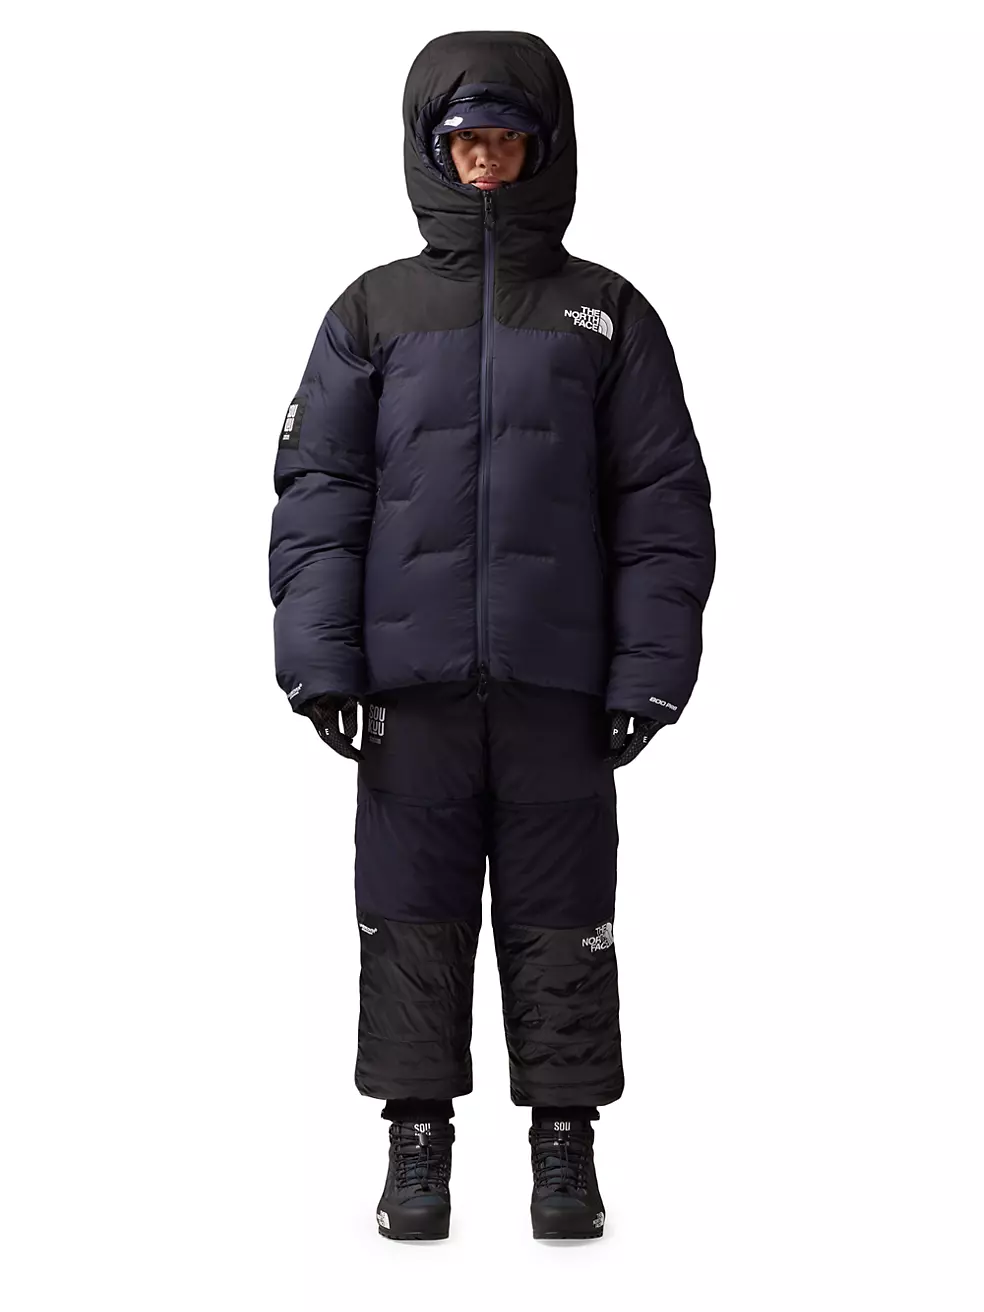 The North Face x Undercover Nuptse Cloud Down Jacket